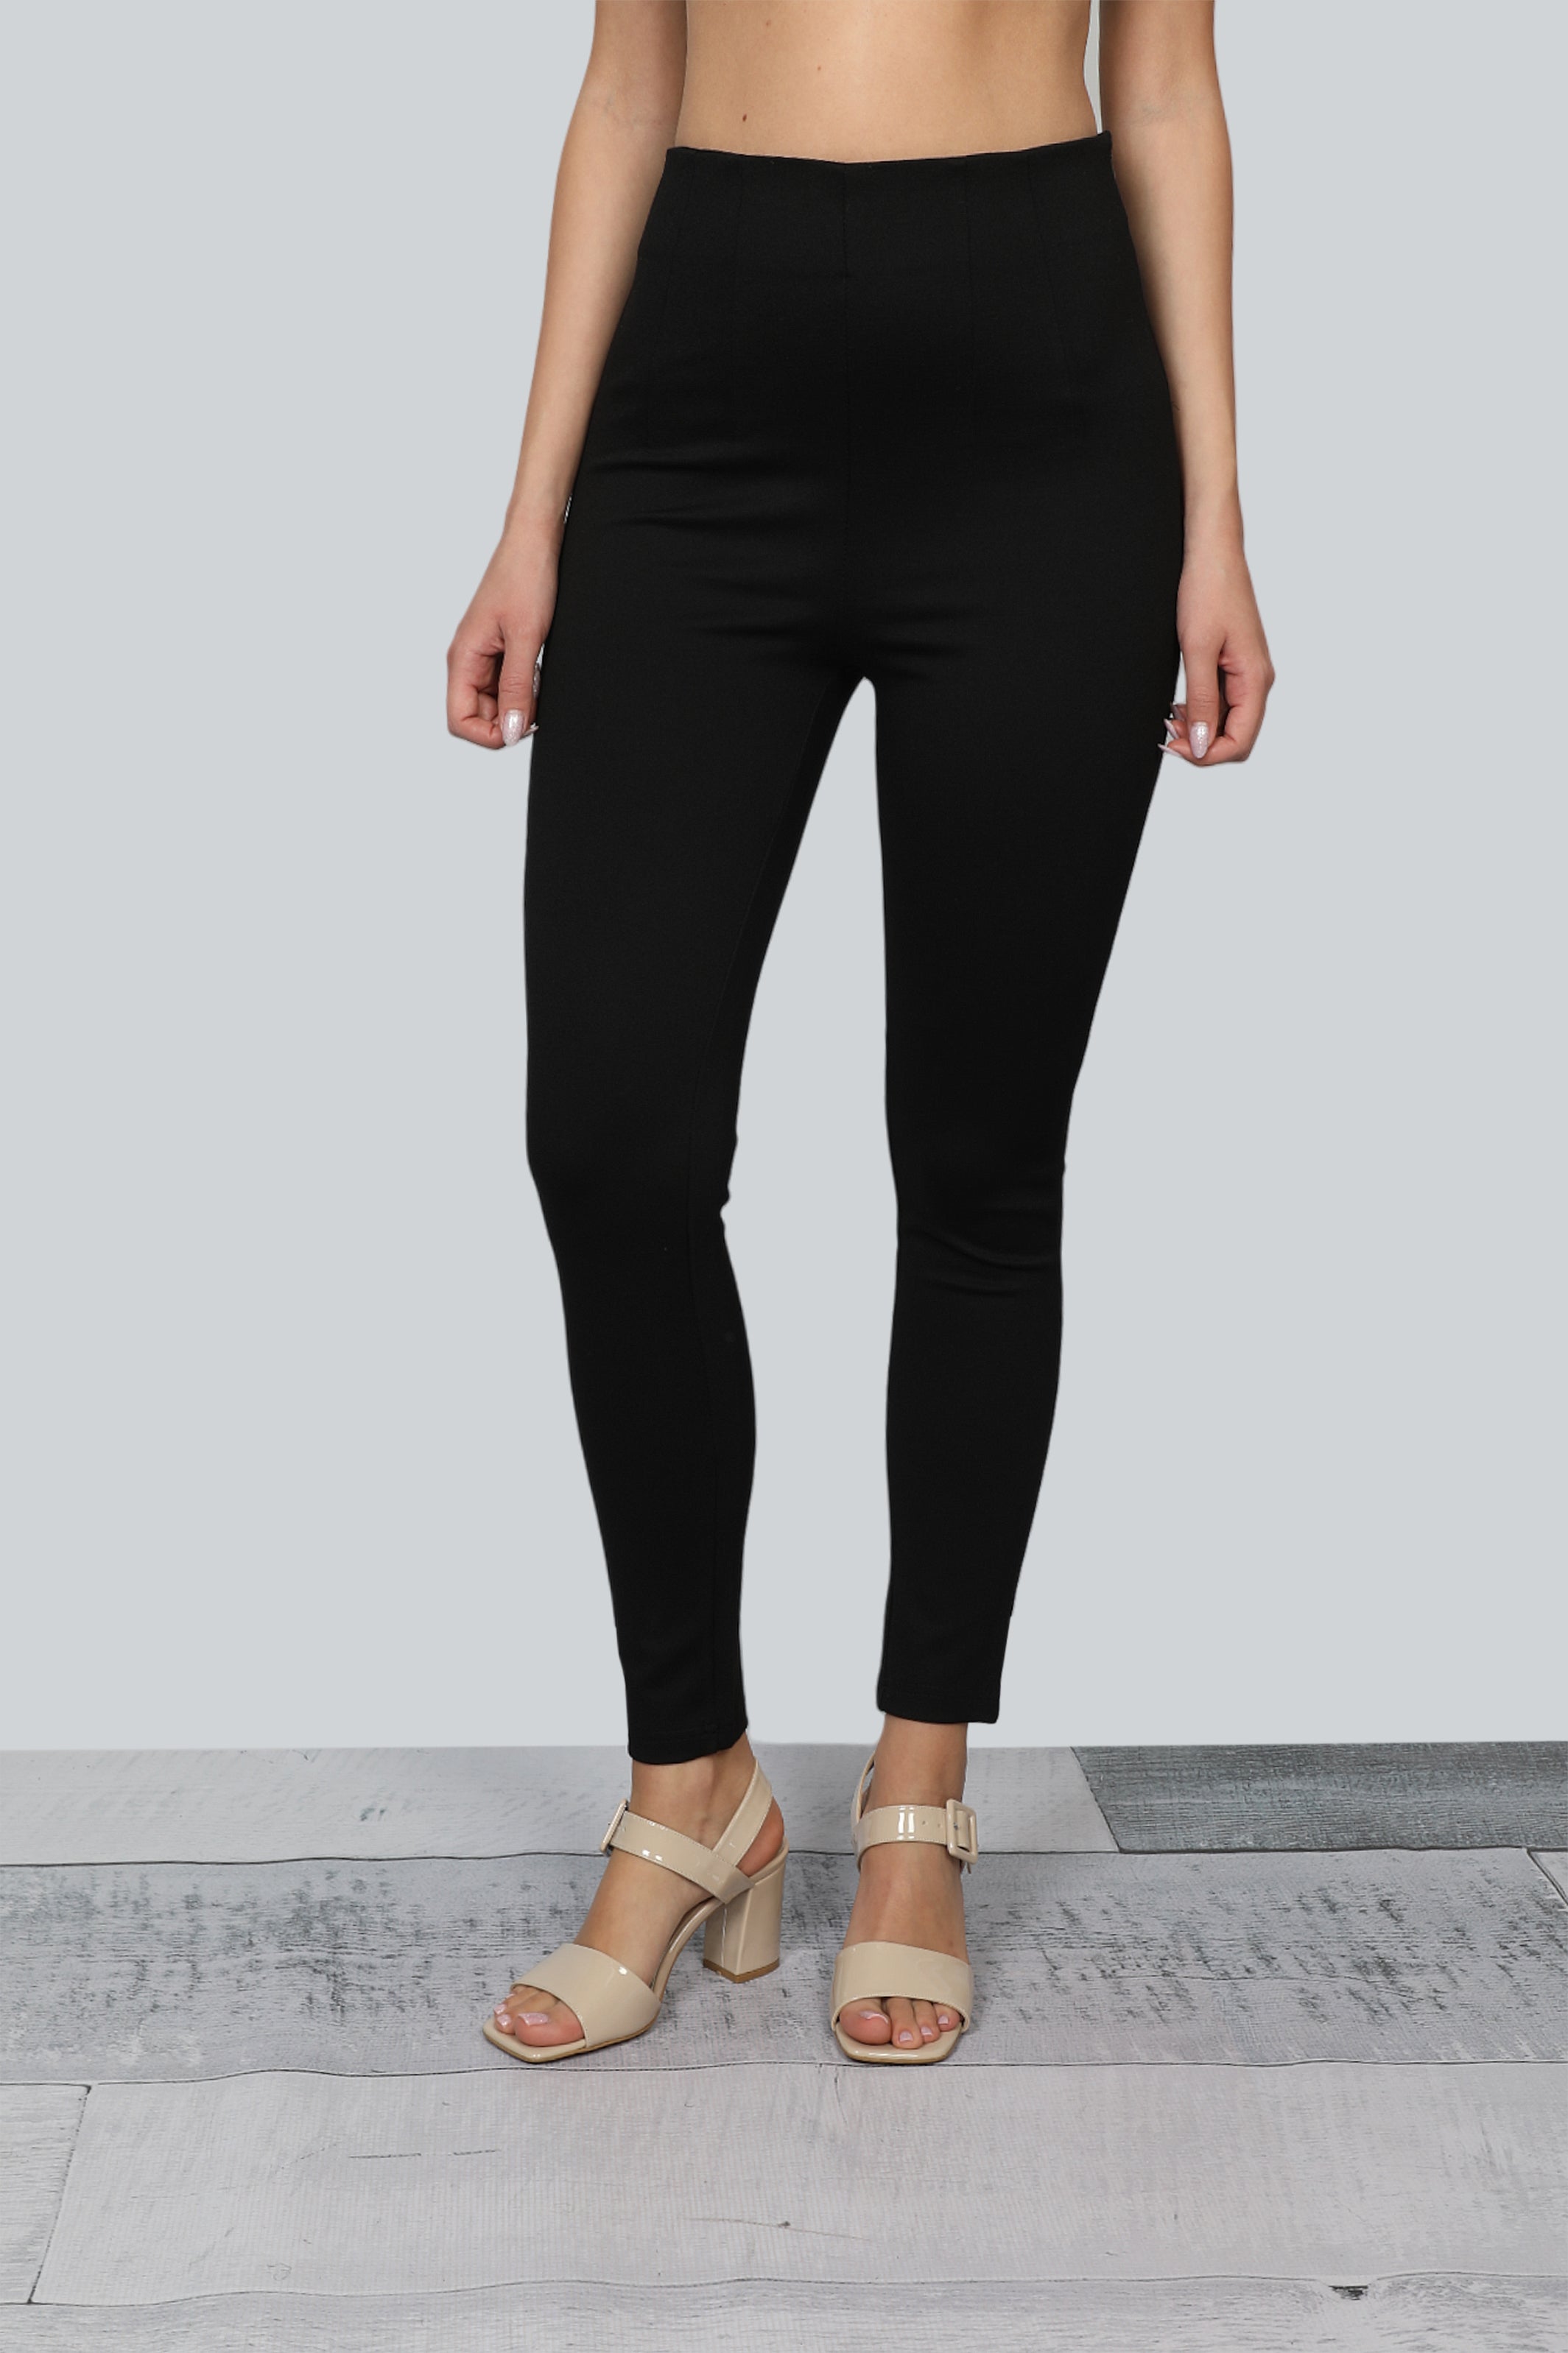 High Waisted Black Pants With Side Zipper